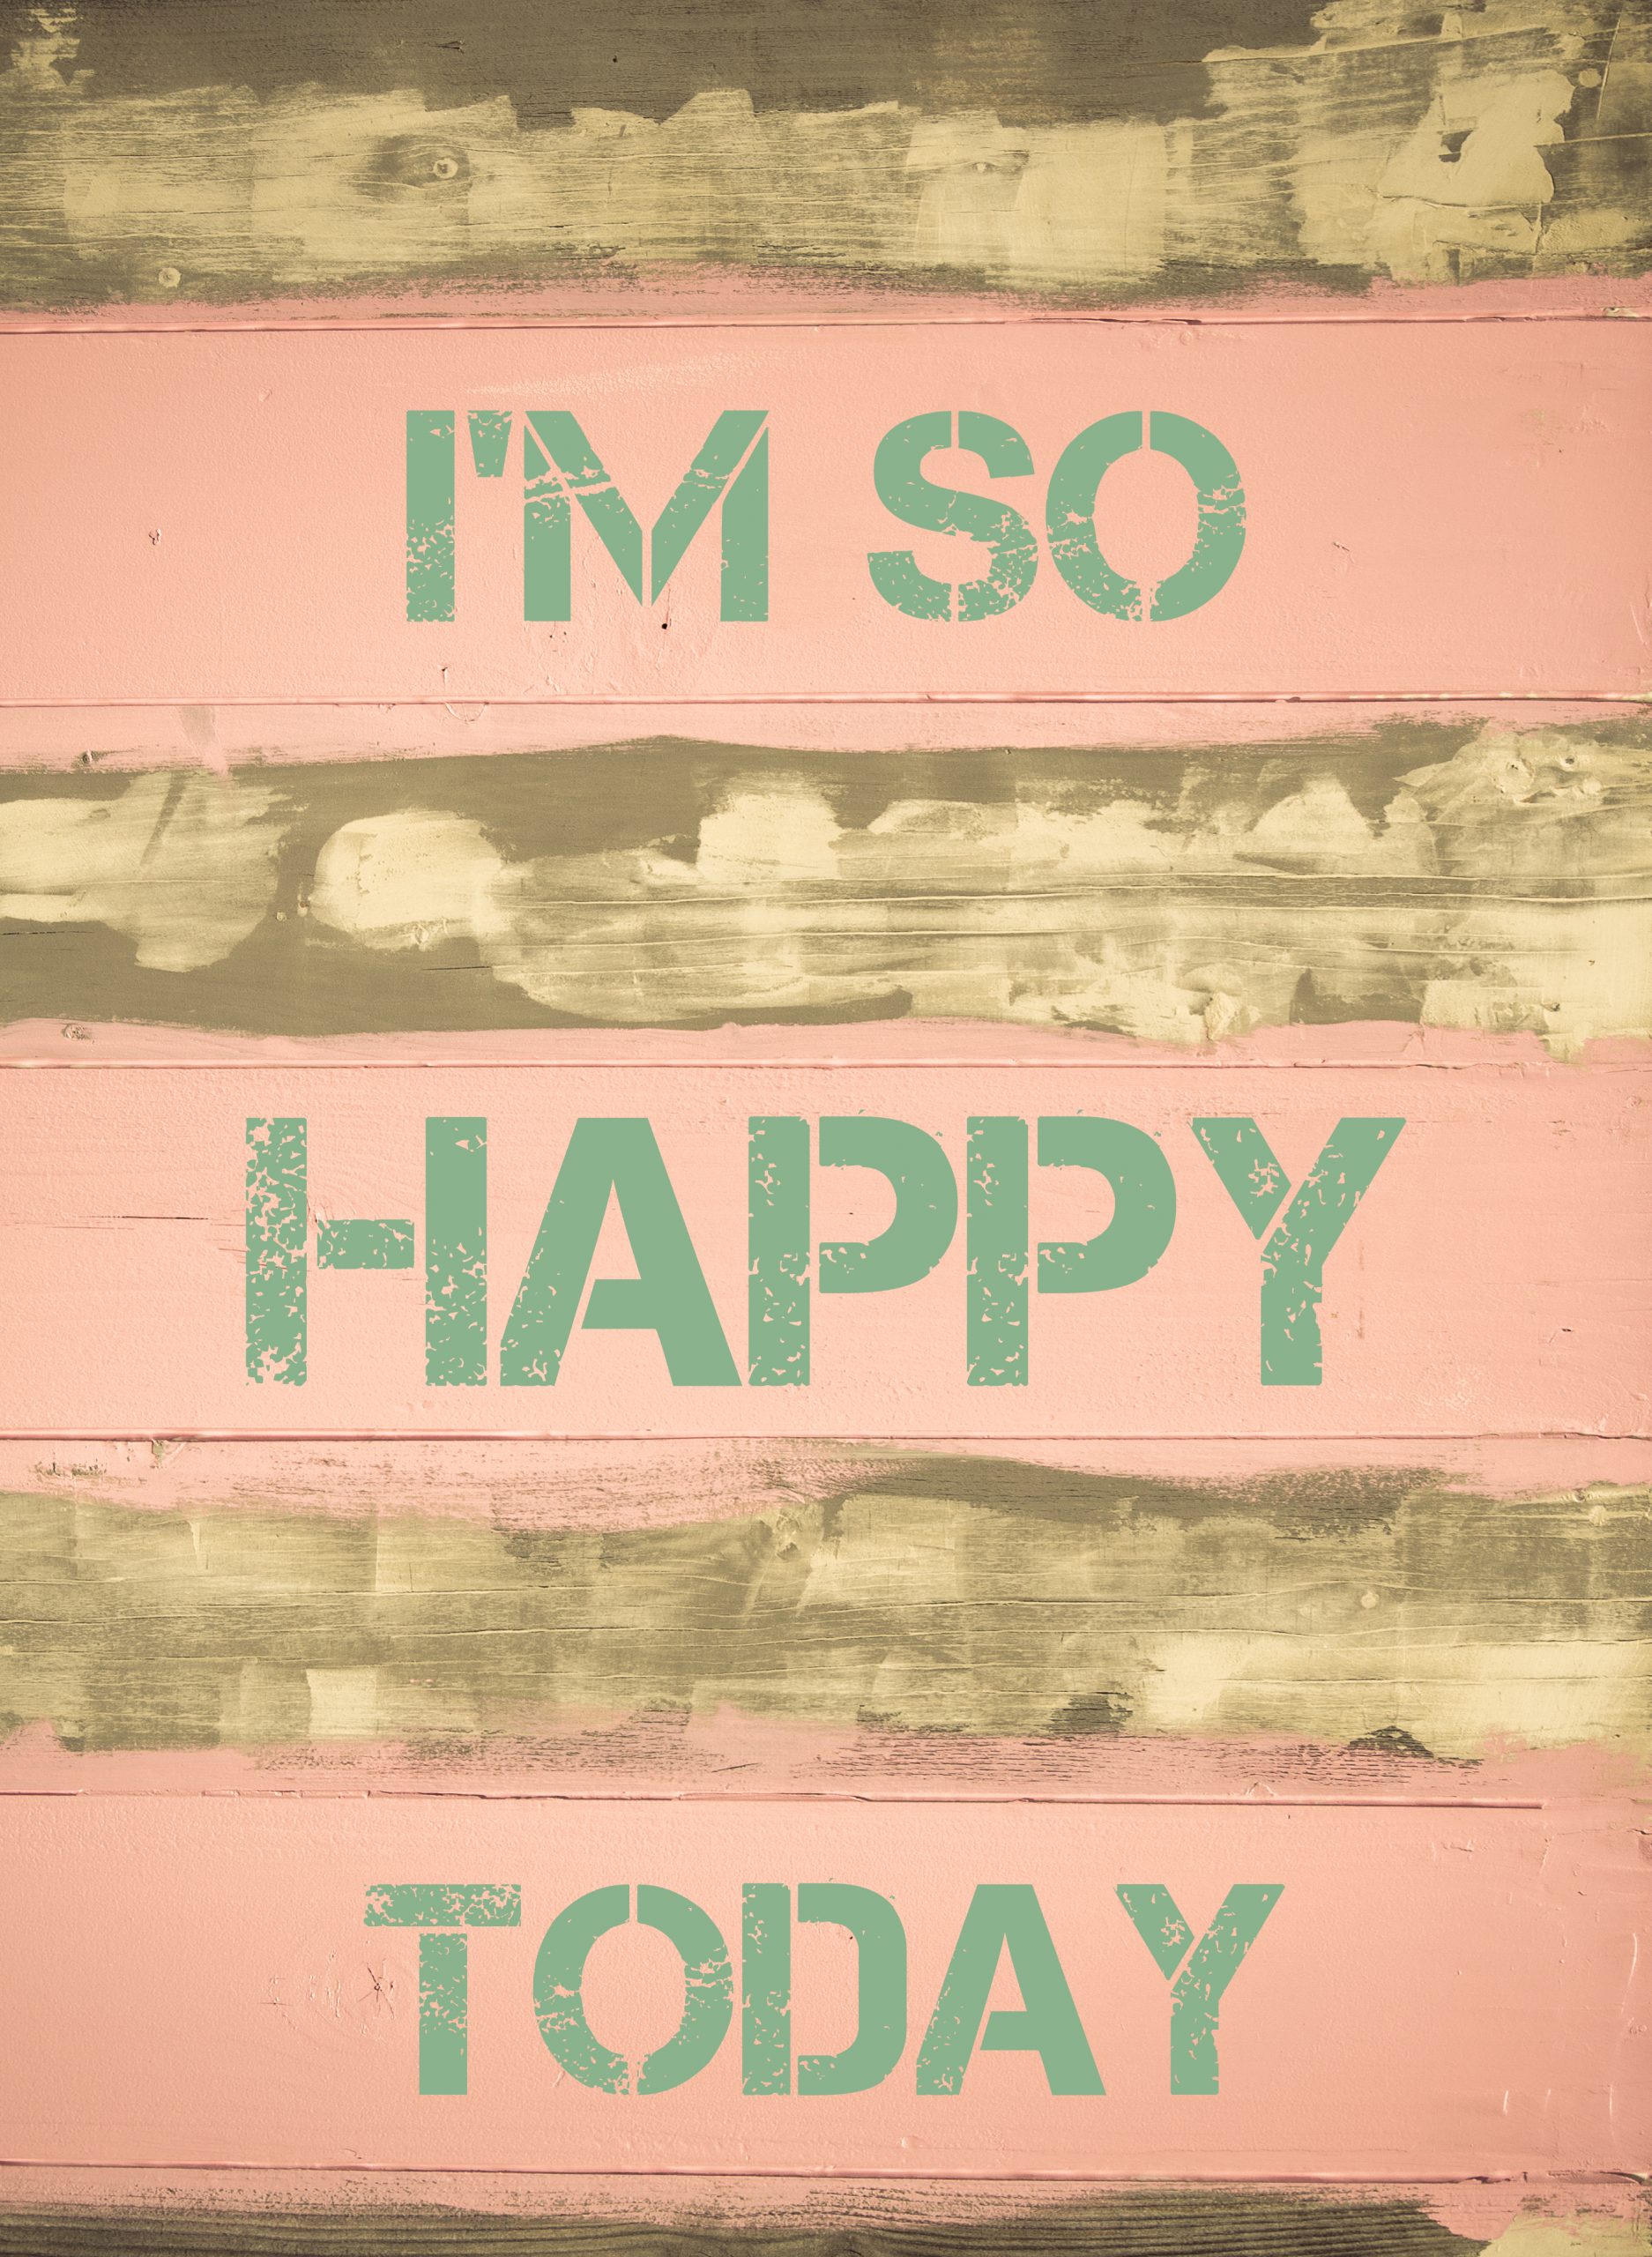 I’M SO HAPPY TODAY motivational quote